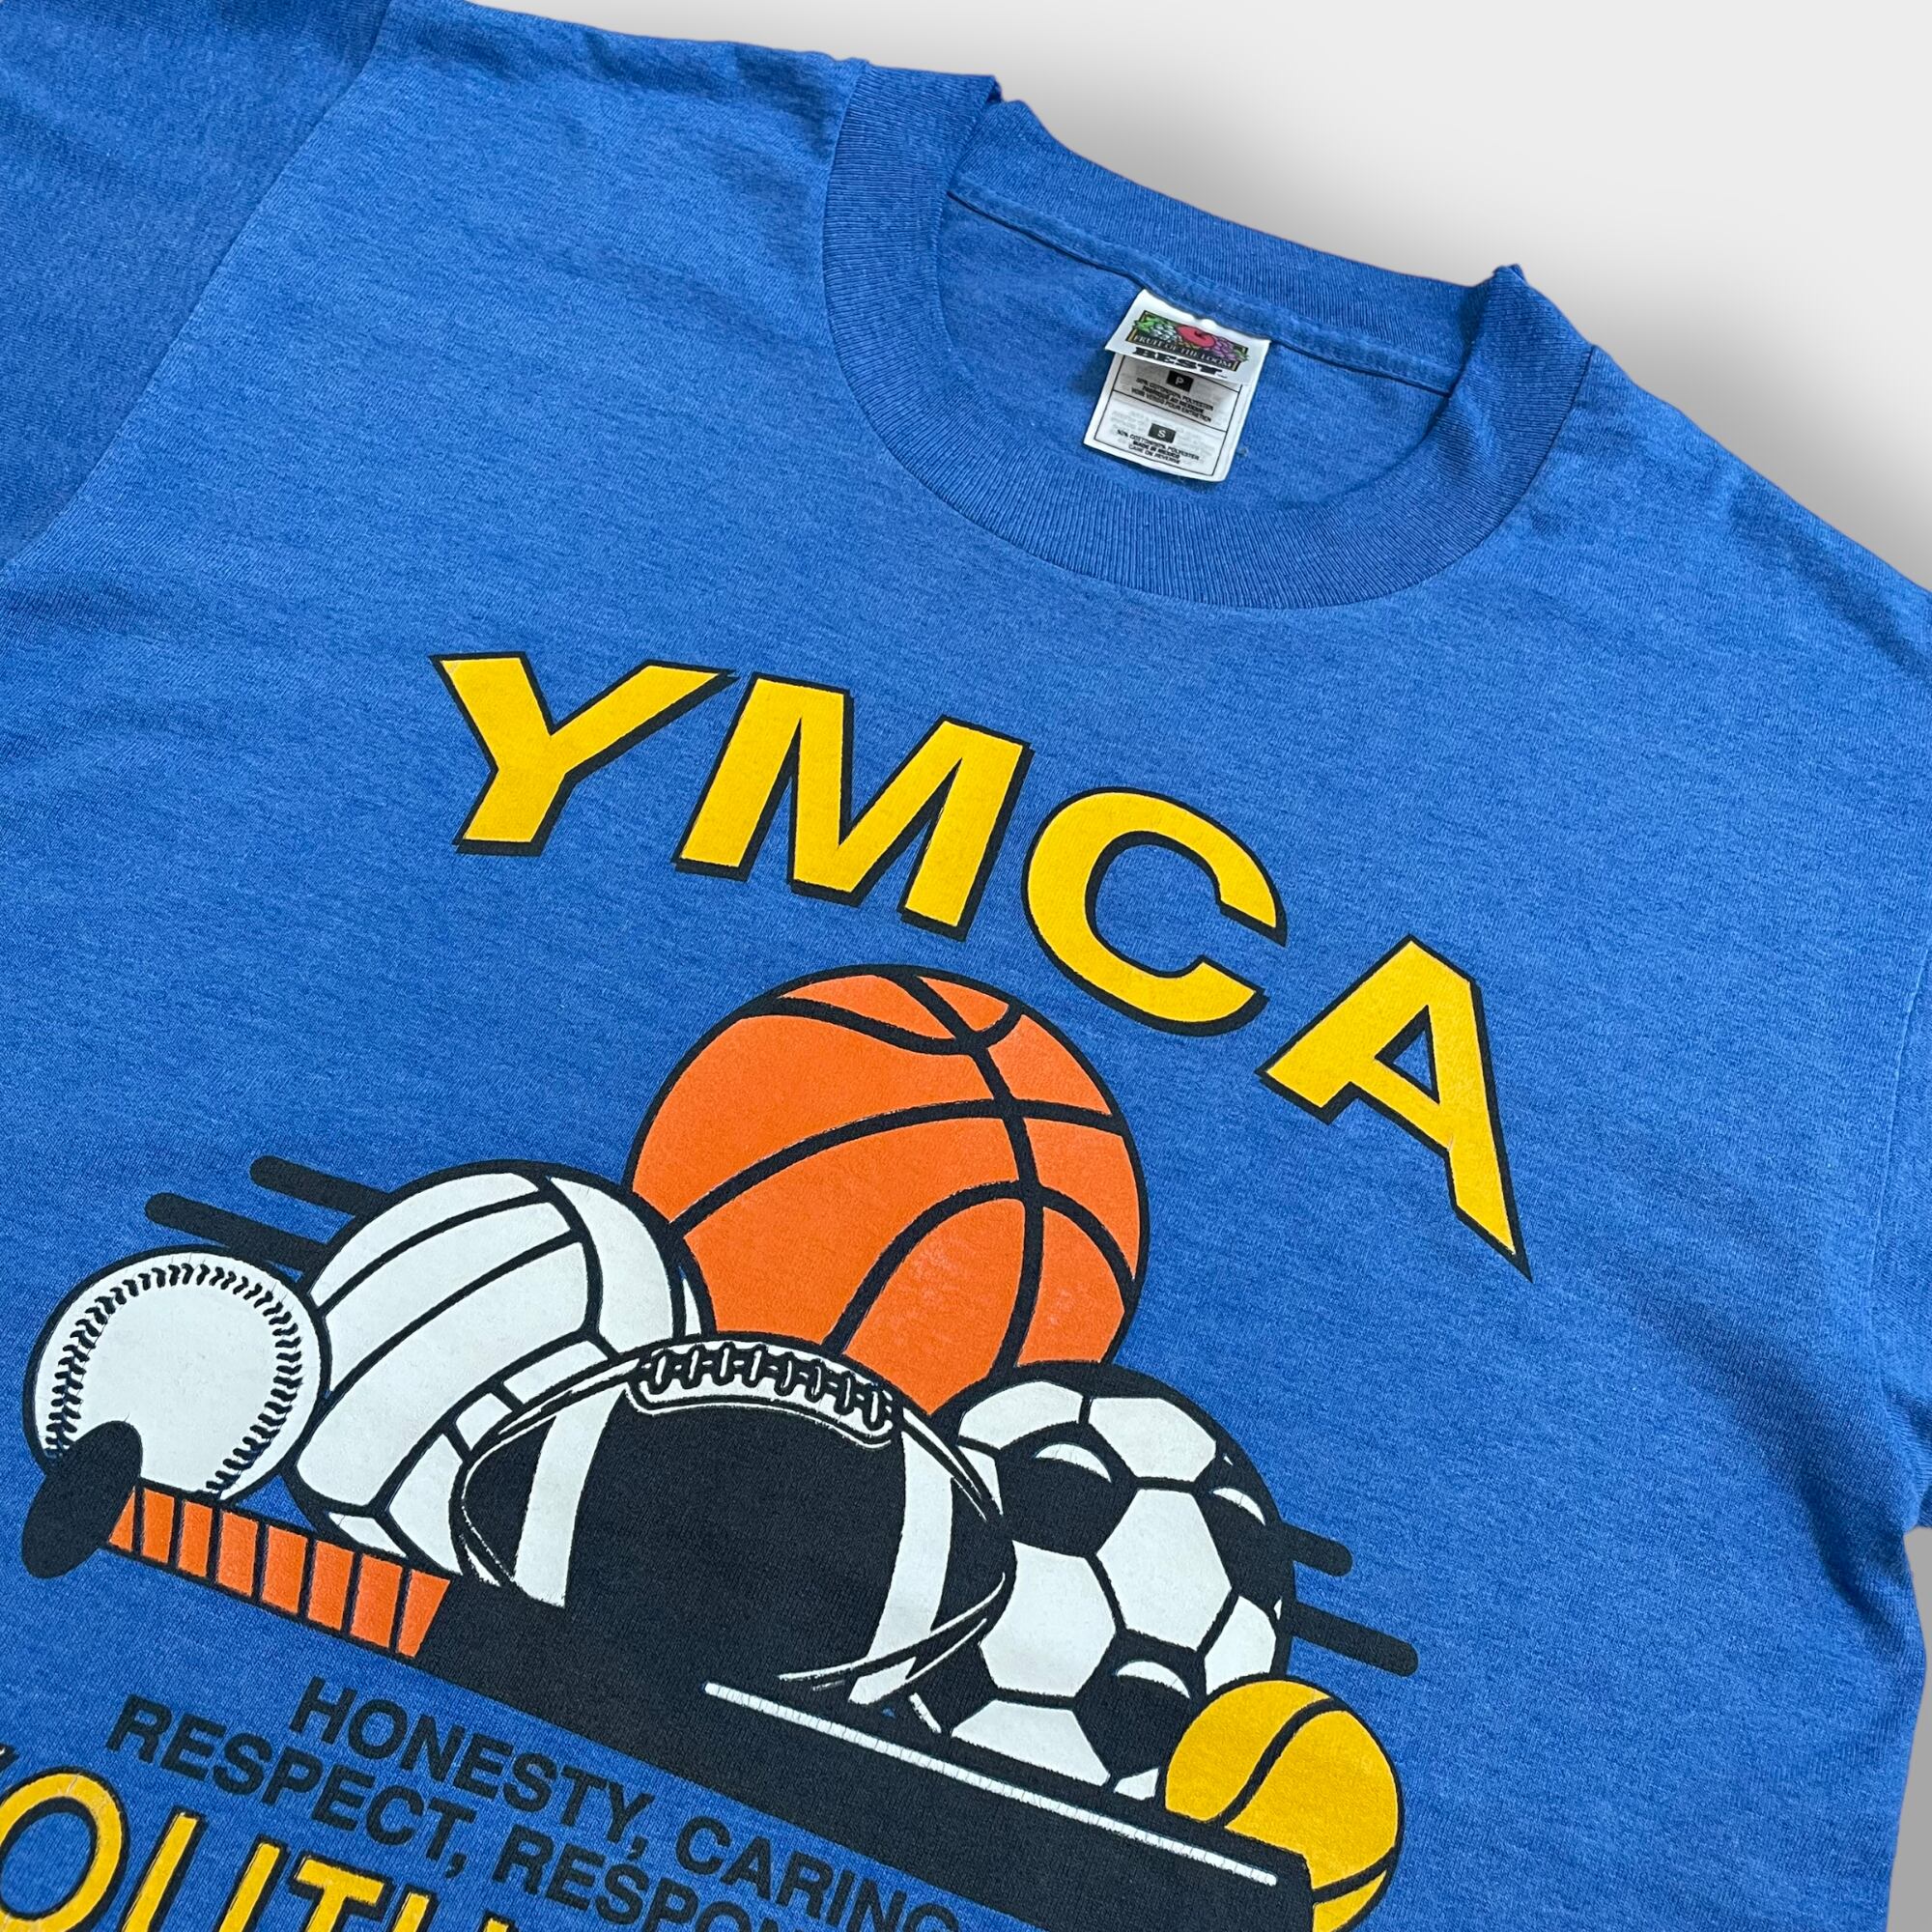 【FRUIT OF THE LOOM】90s メキシコ製 YMCA アーチロゴ スポーツプリントTシャツ シングルステッチ OLD ビンテージ S  US古着 | 古着屋手ぶらがbest powered by BASE